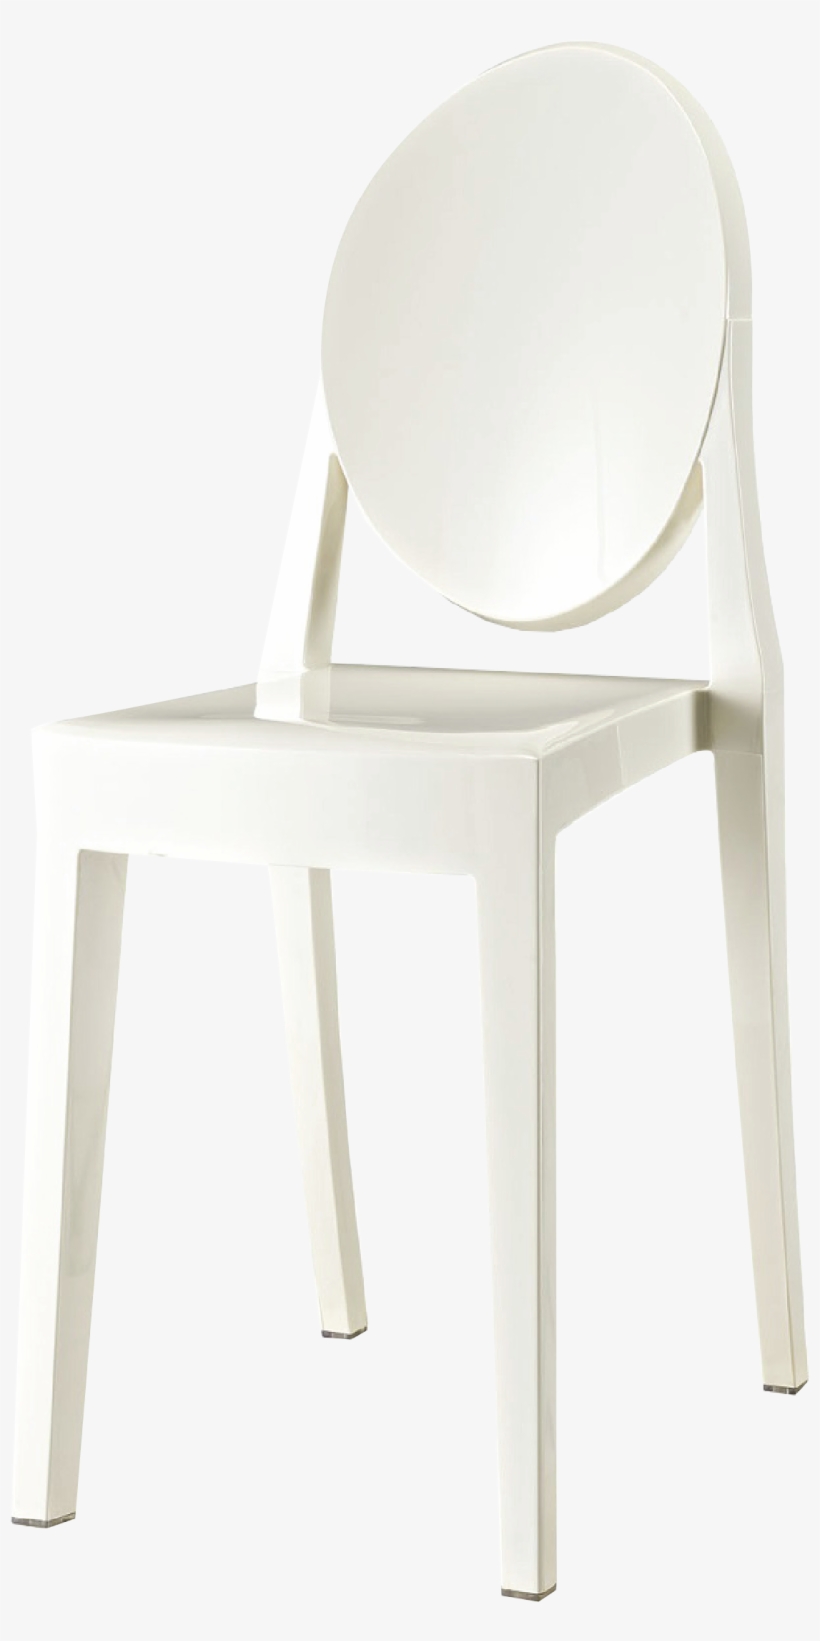 Png Free Ghost Chair - Ghost Chair Png Transparent, transparent png #2496778